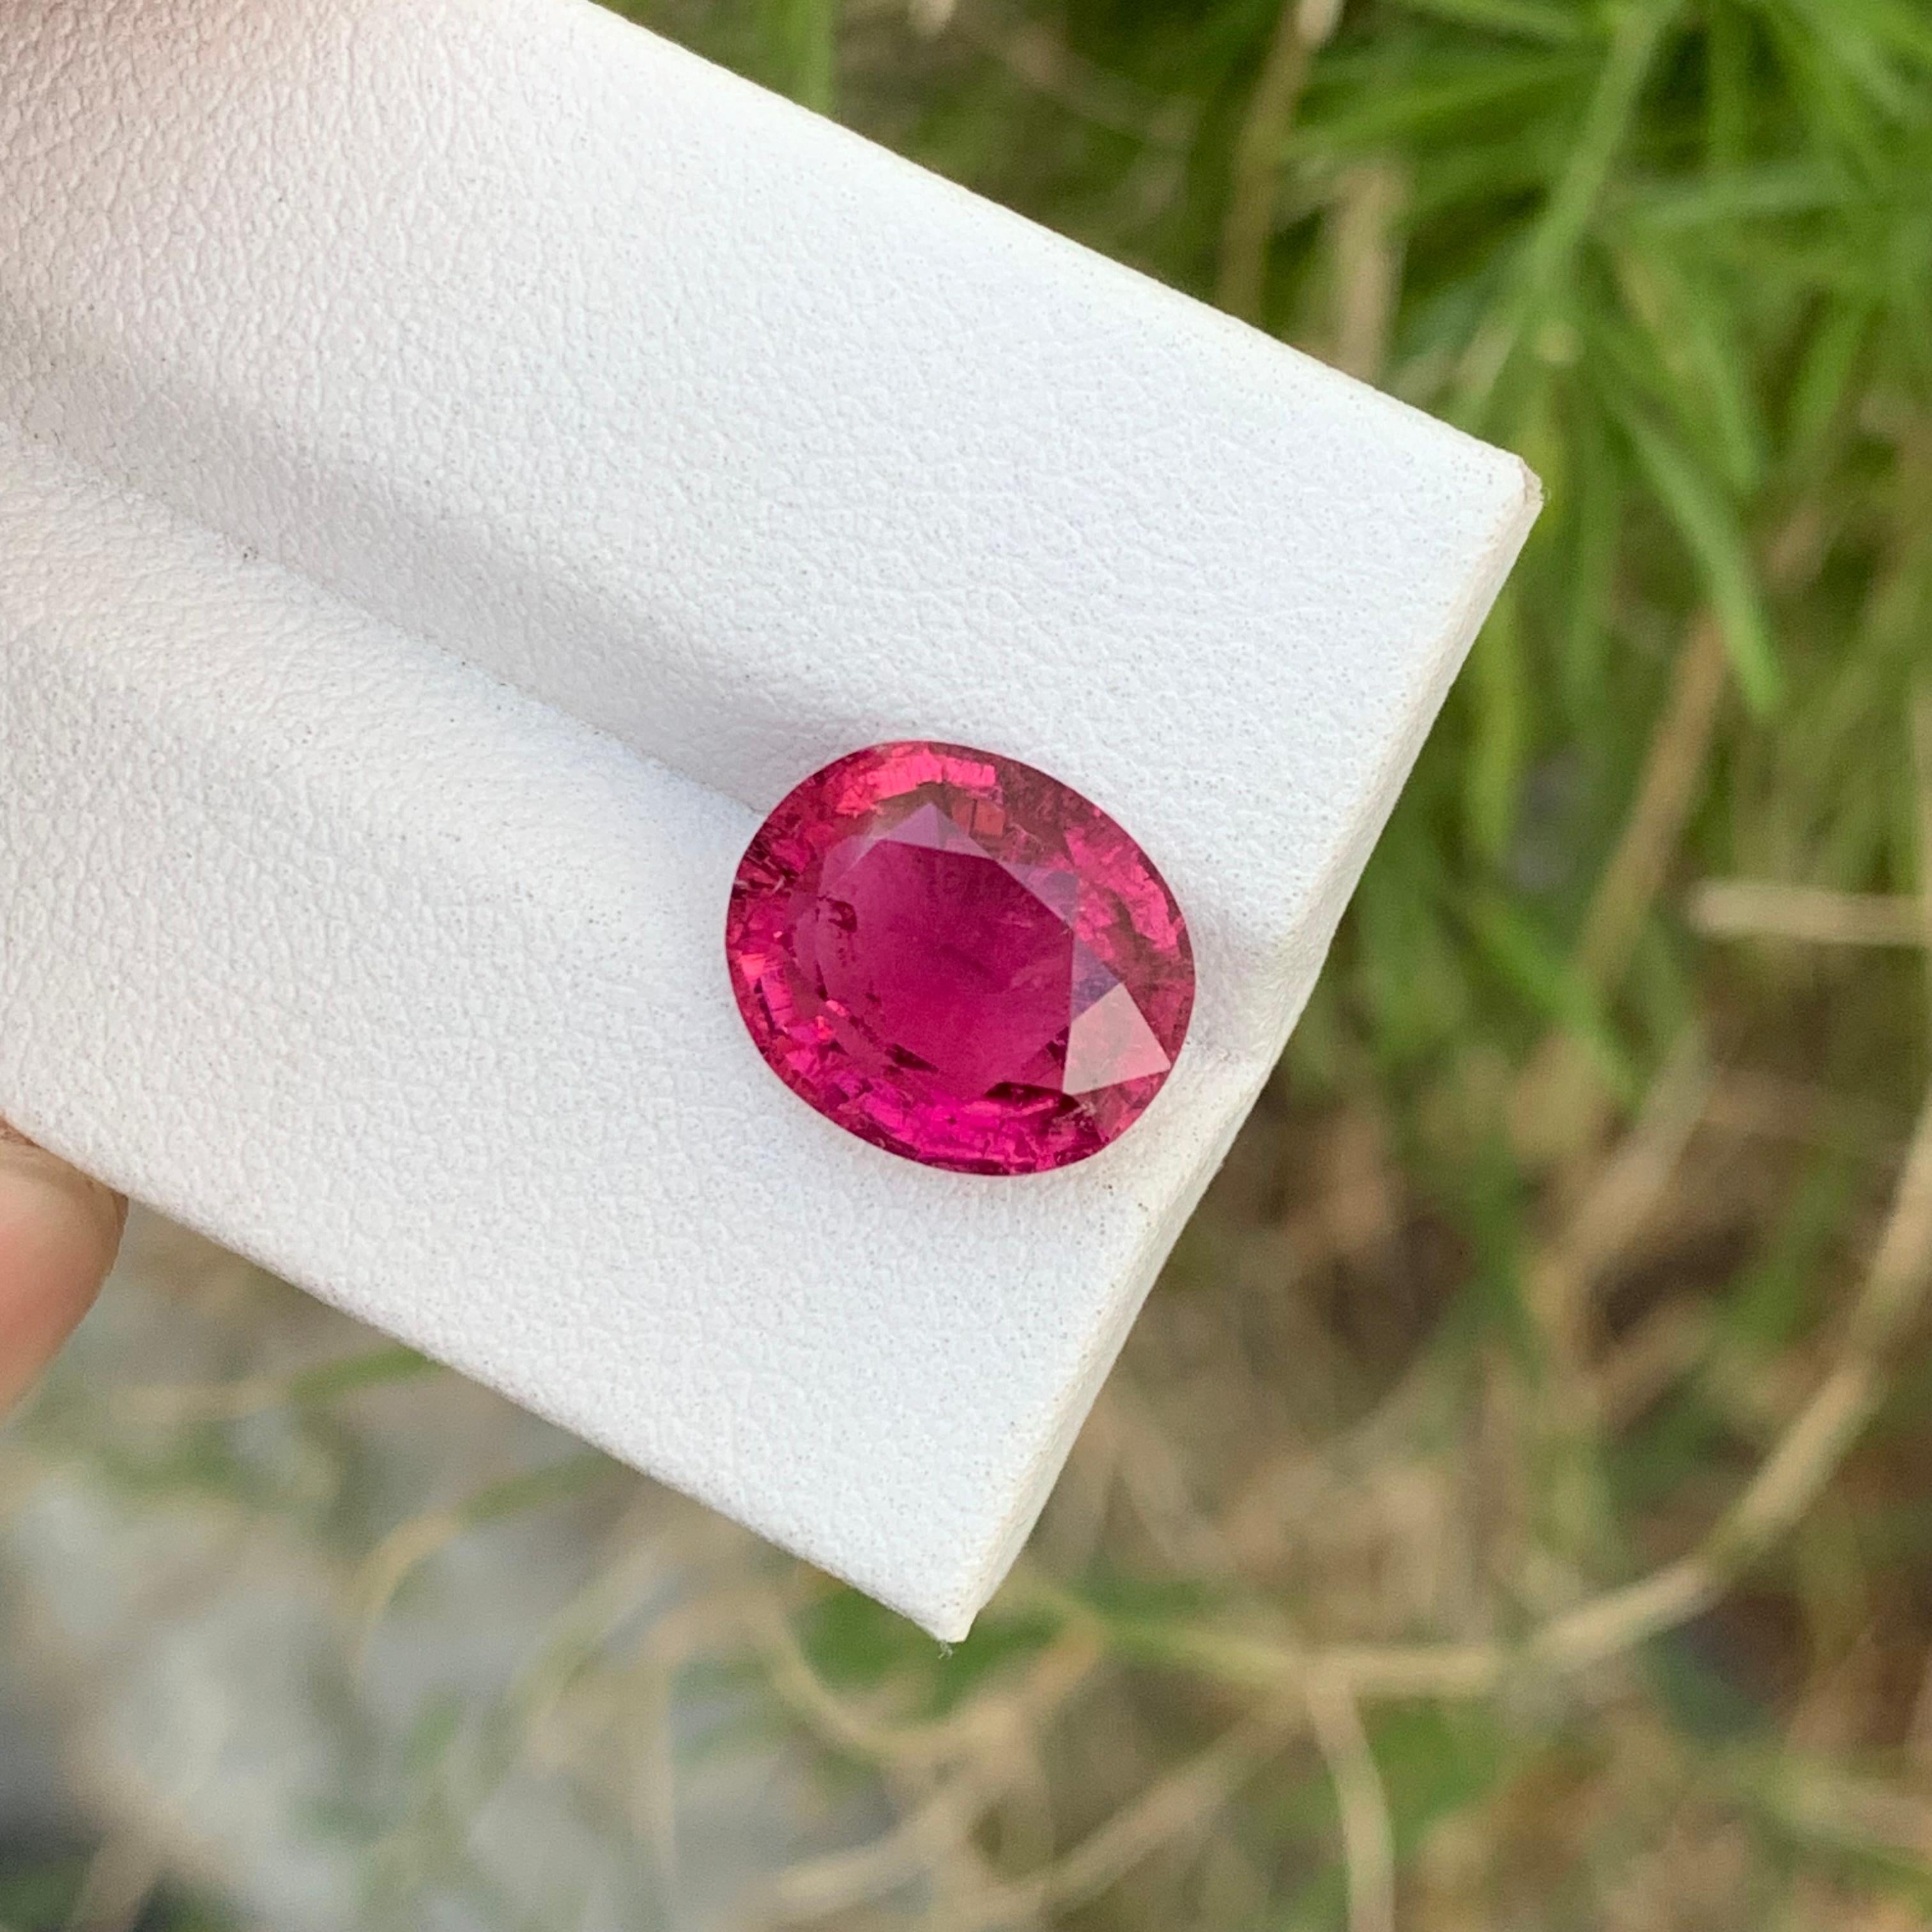 Arts and Crafts 4.70 Carat Glamorous Loose Rubellite Tourmaline Oval Shape Gem For Jewellery  For Sale